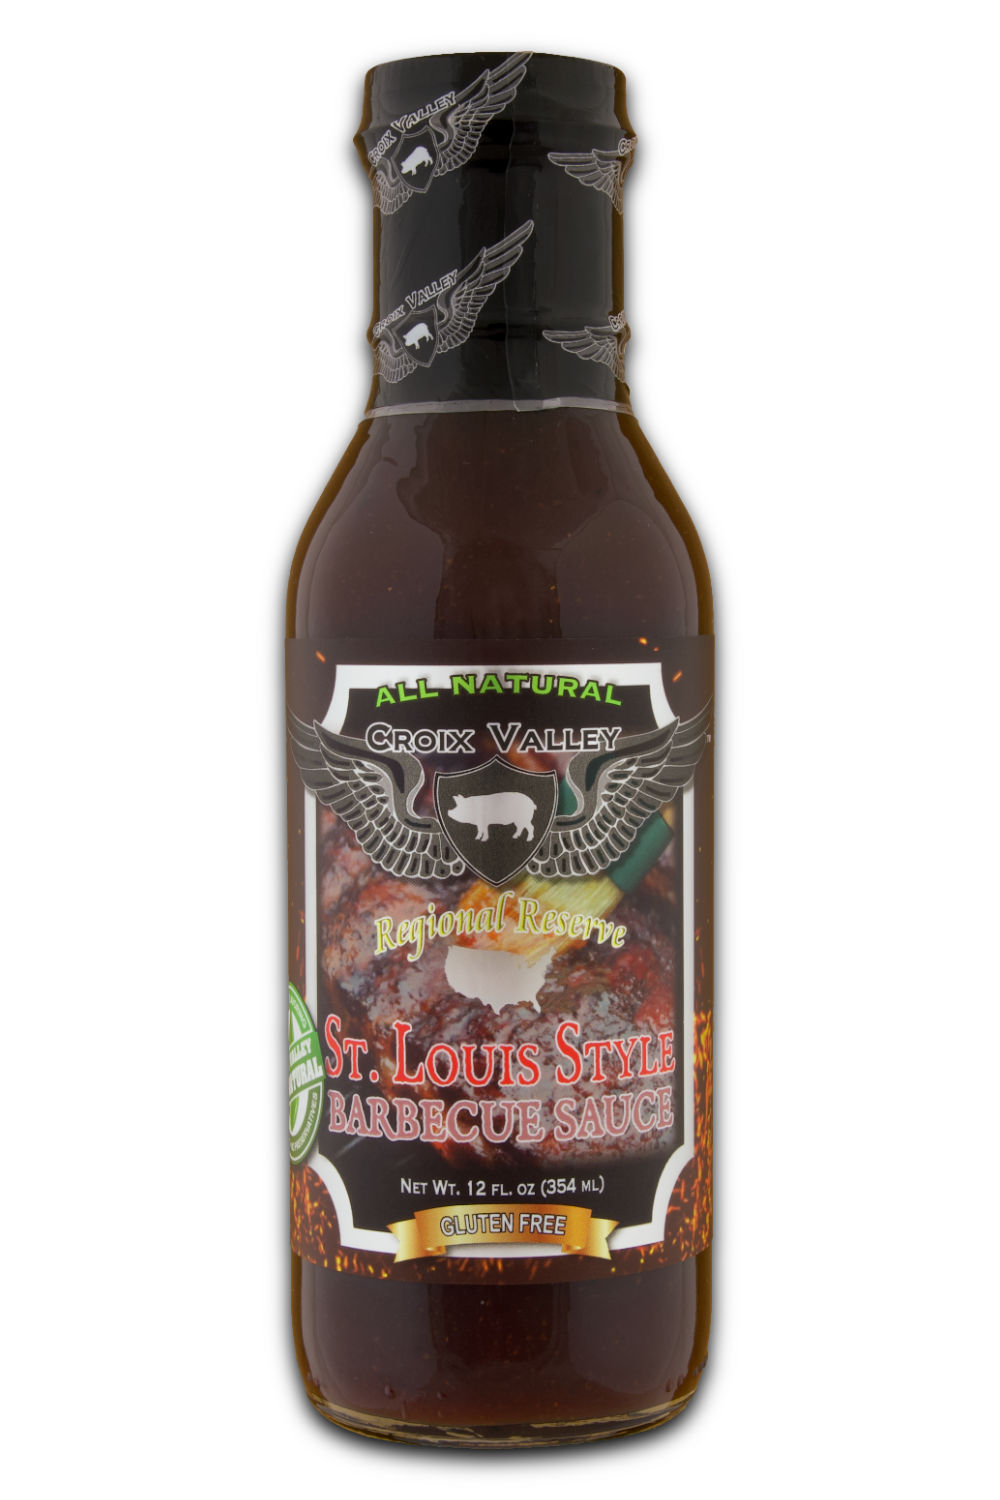 CROIX VALLEY ST. LOUIS STYLE BARBECUE SAUCE